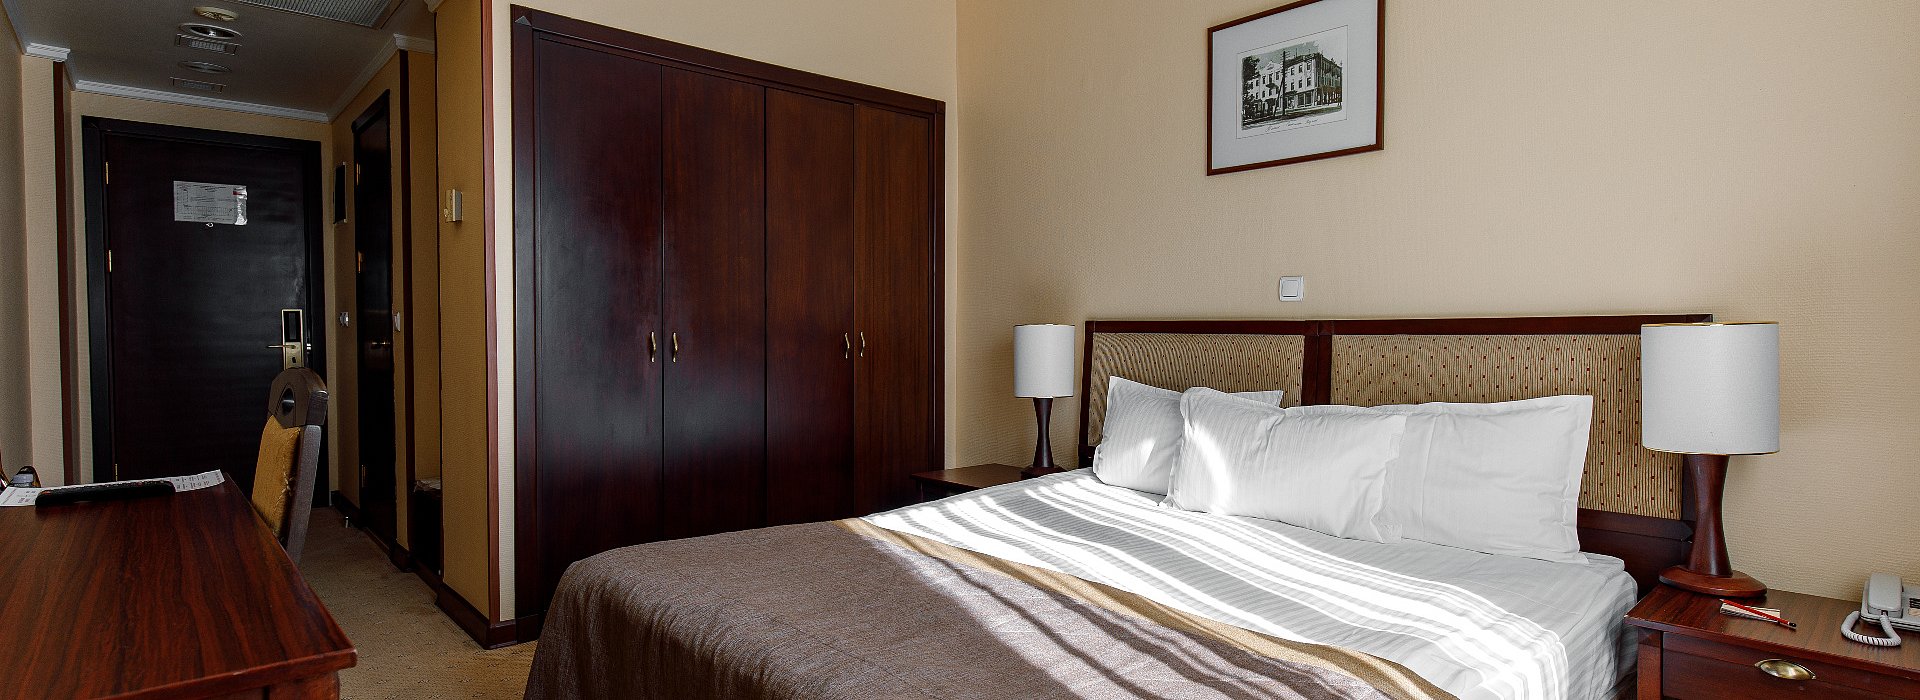 Standard double room with one double-size bed